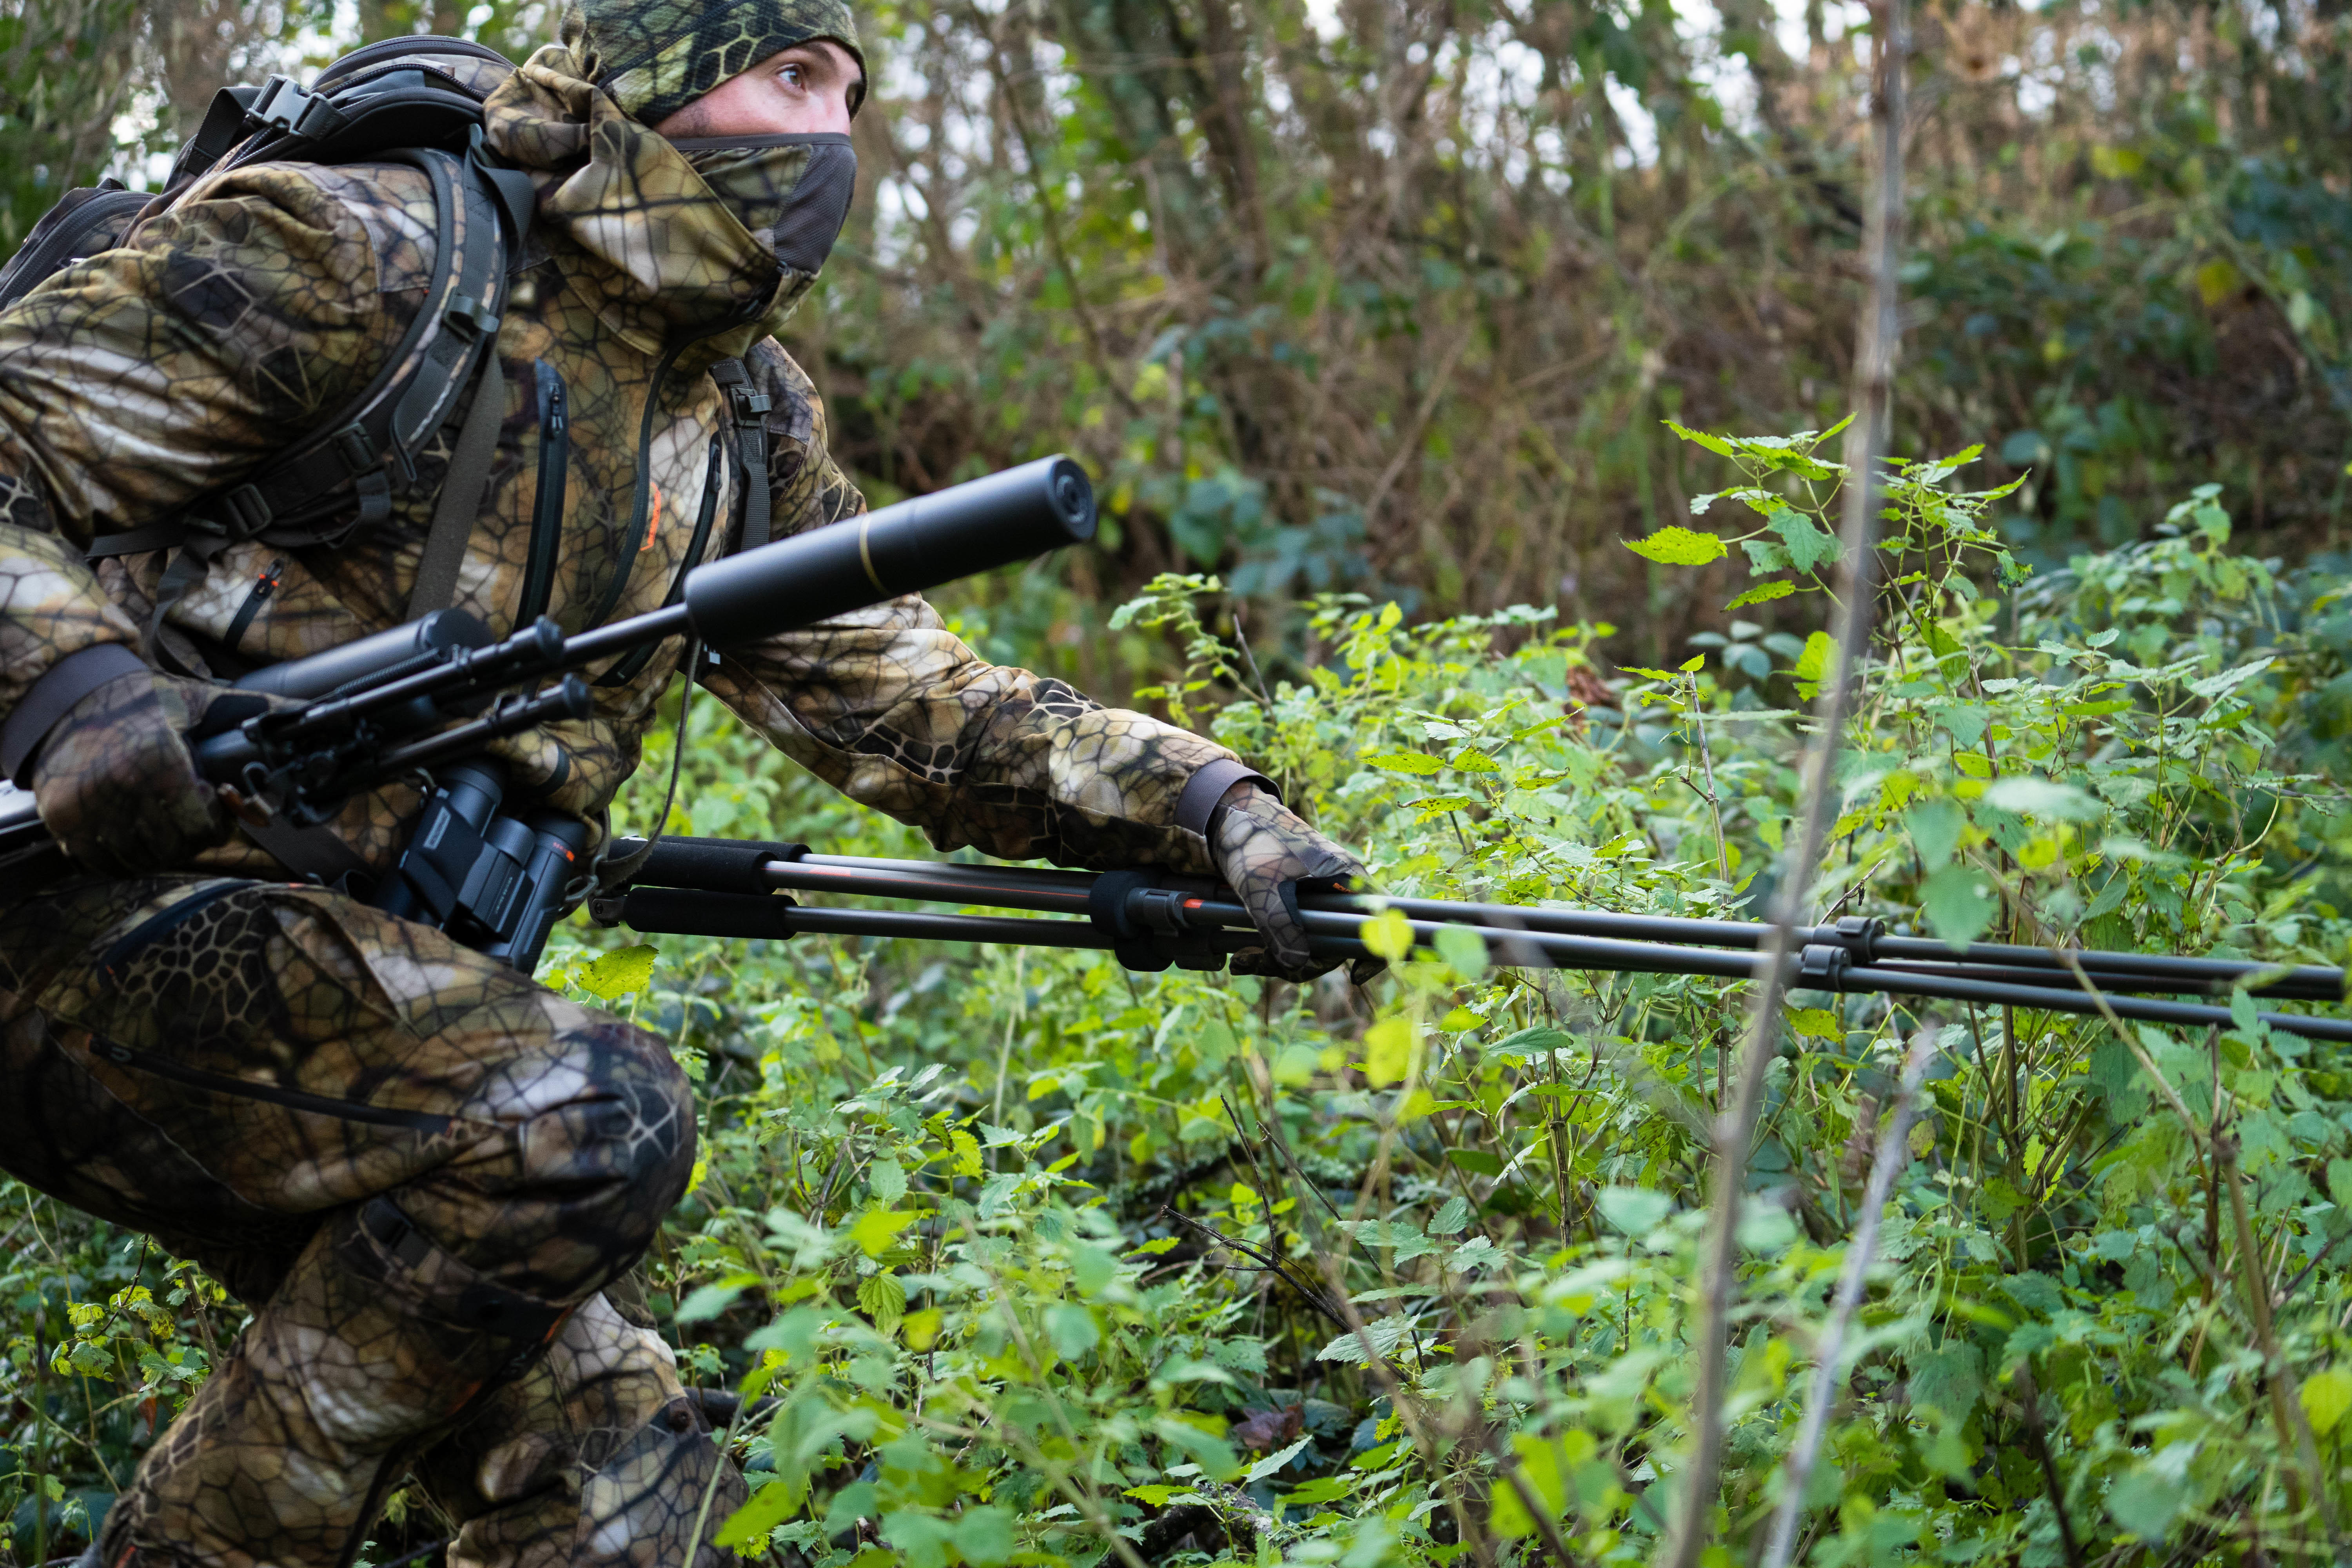 XPR Silent Hunting Pants